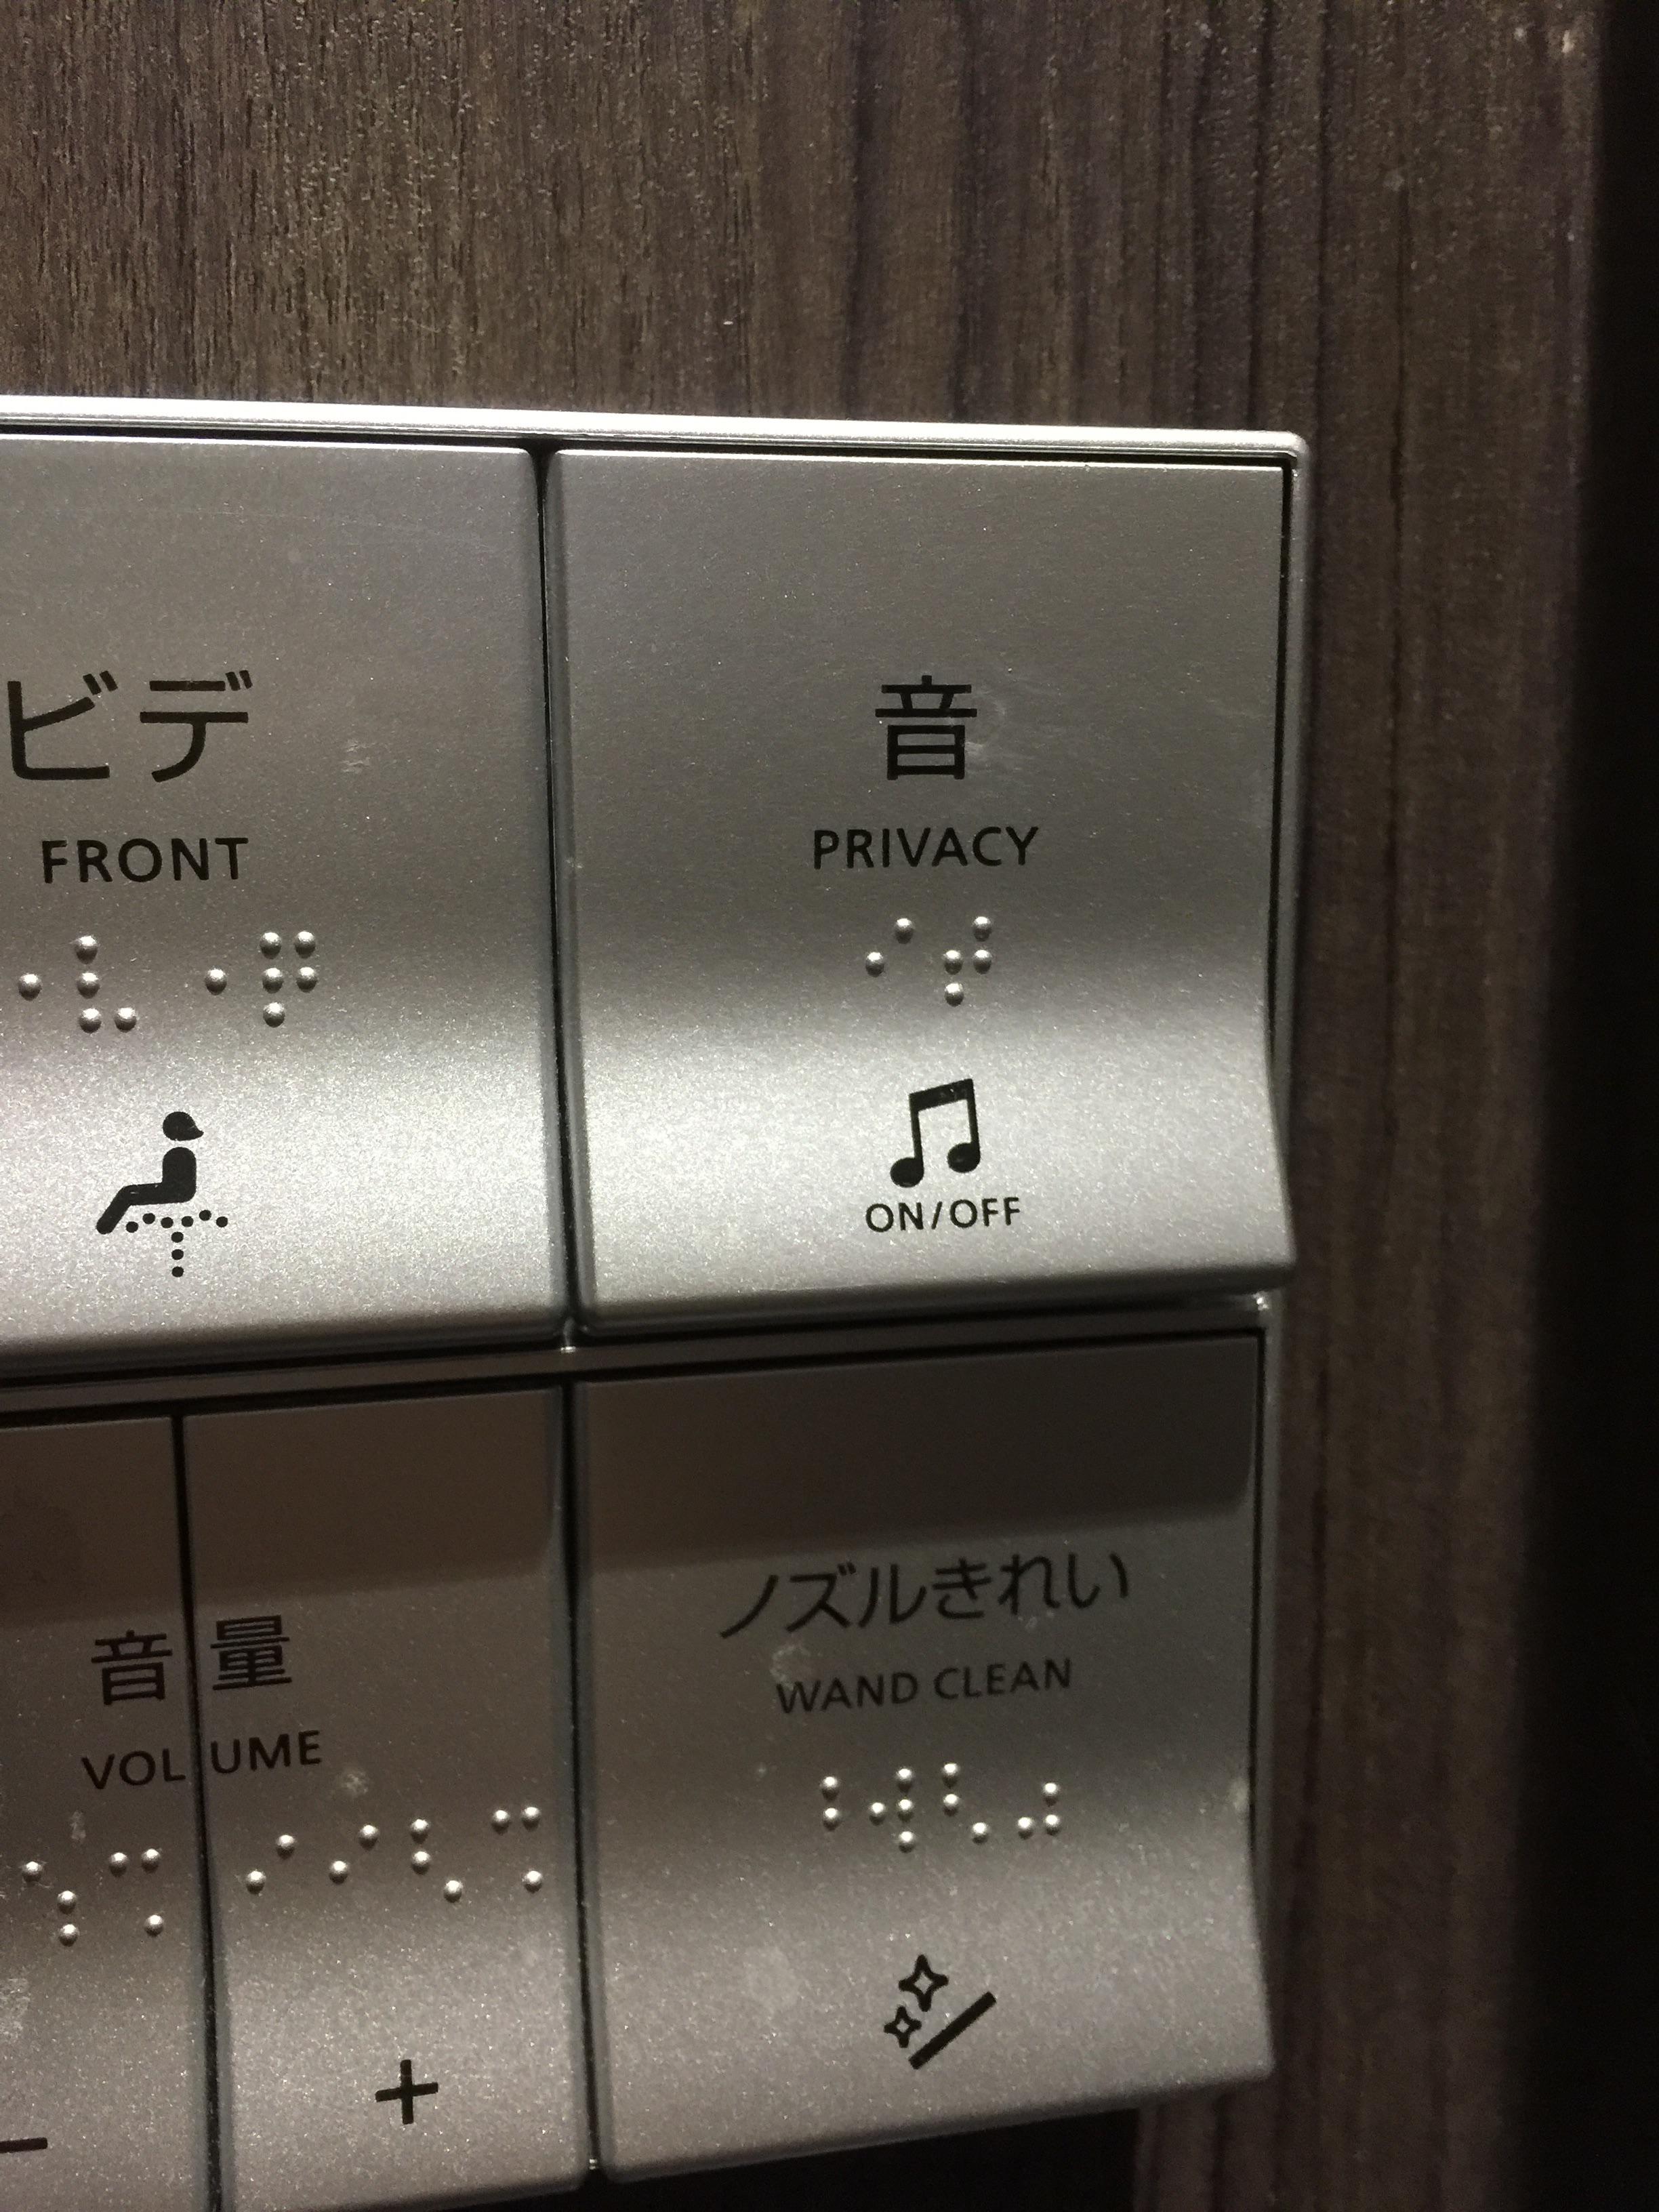 I think Japan is ahead of their time with regards to toilets. 